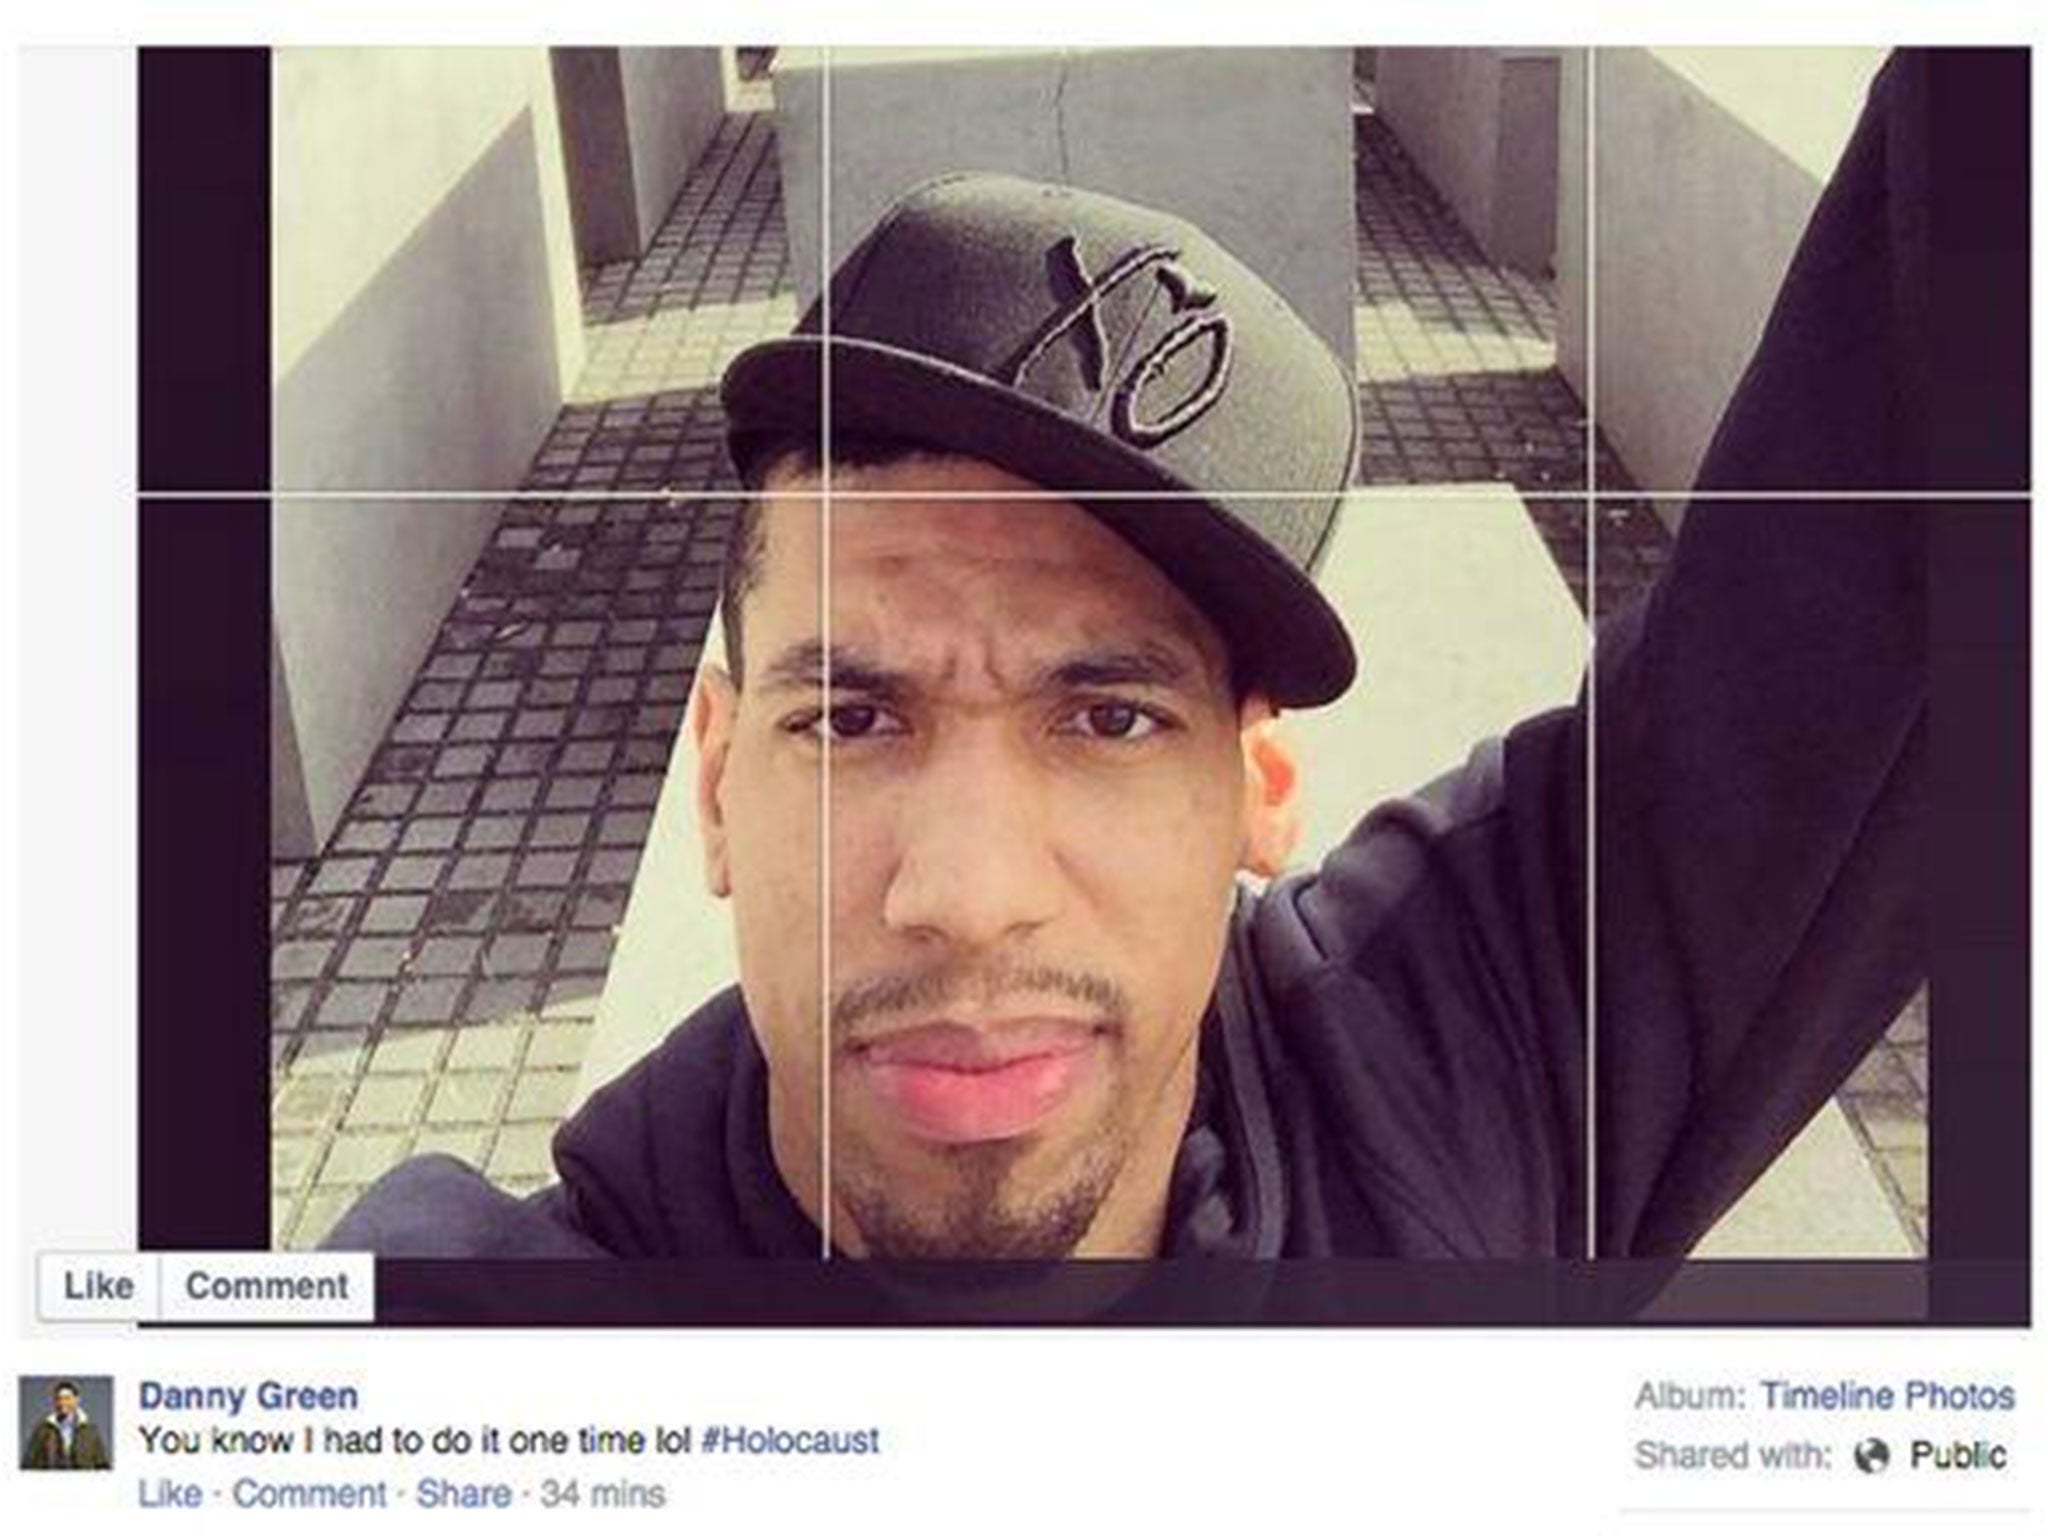 San Antonio Spurs shooting guard Danny Green posted this picture on Facebook